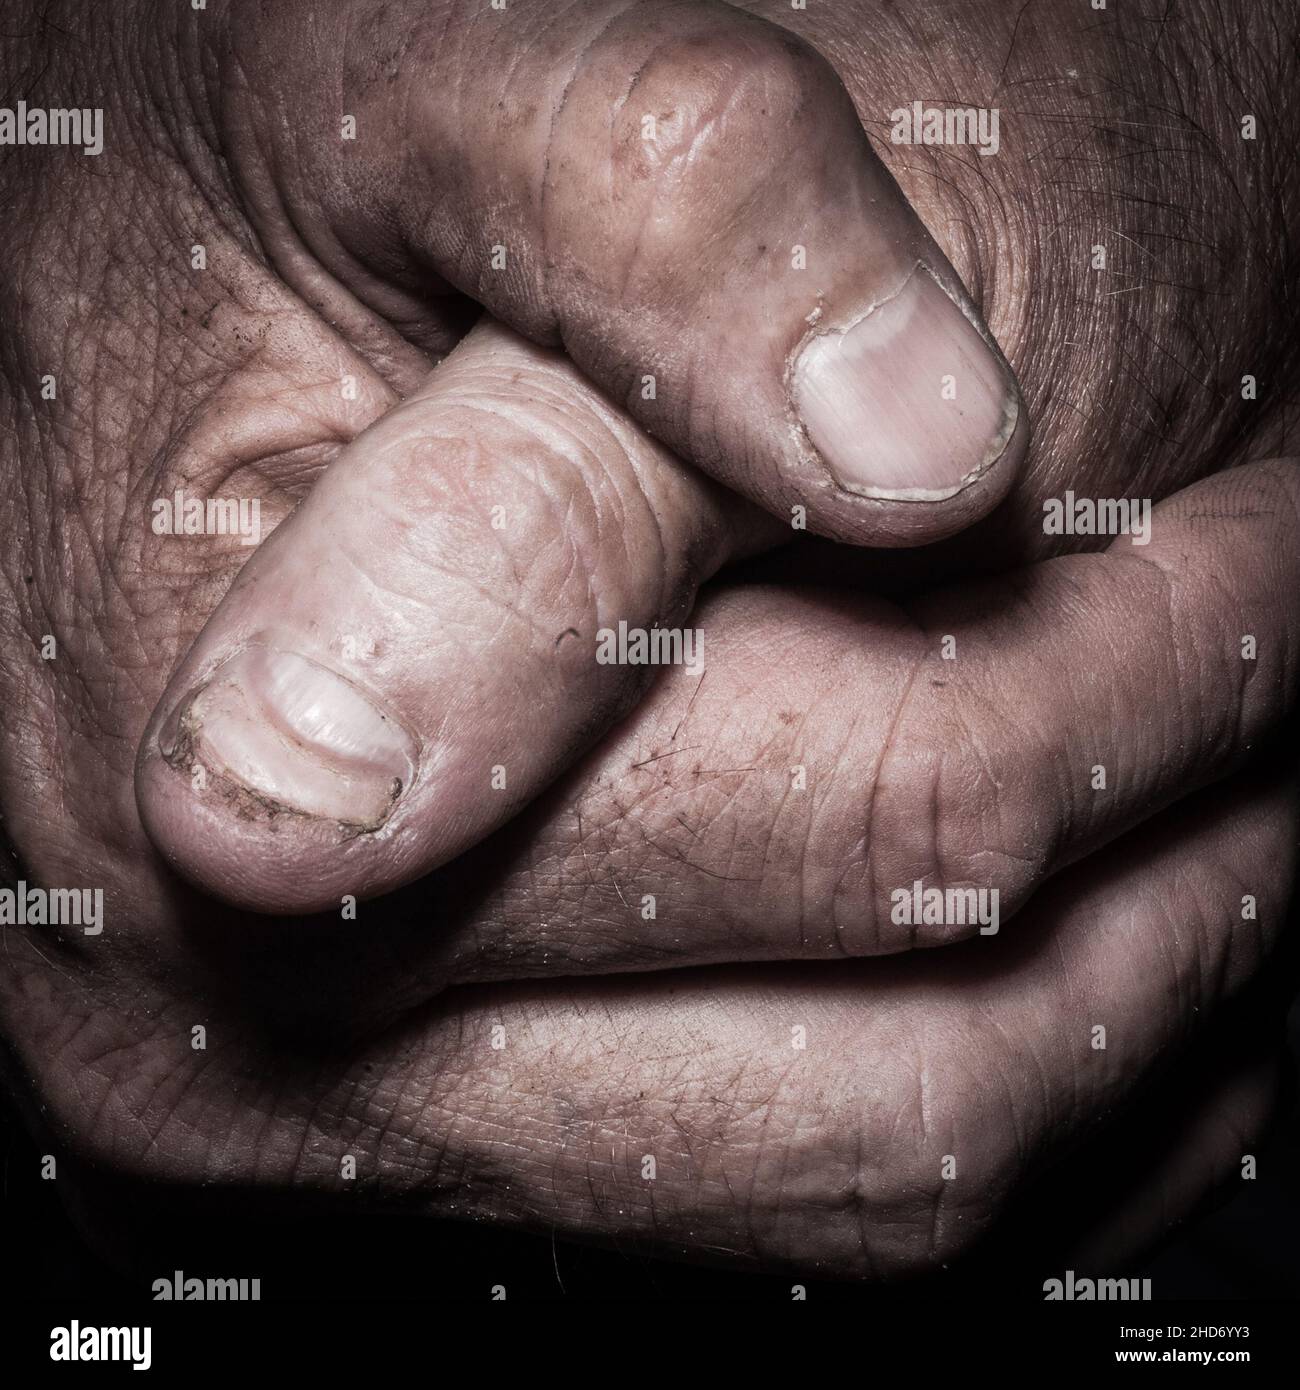 A close-up of an older working man's hands Stock Photo